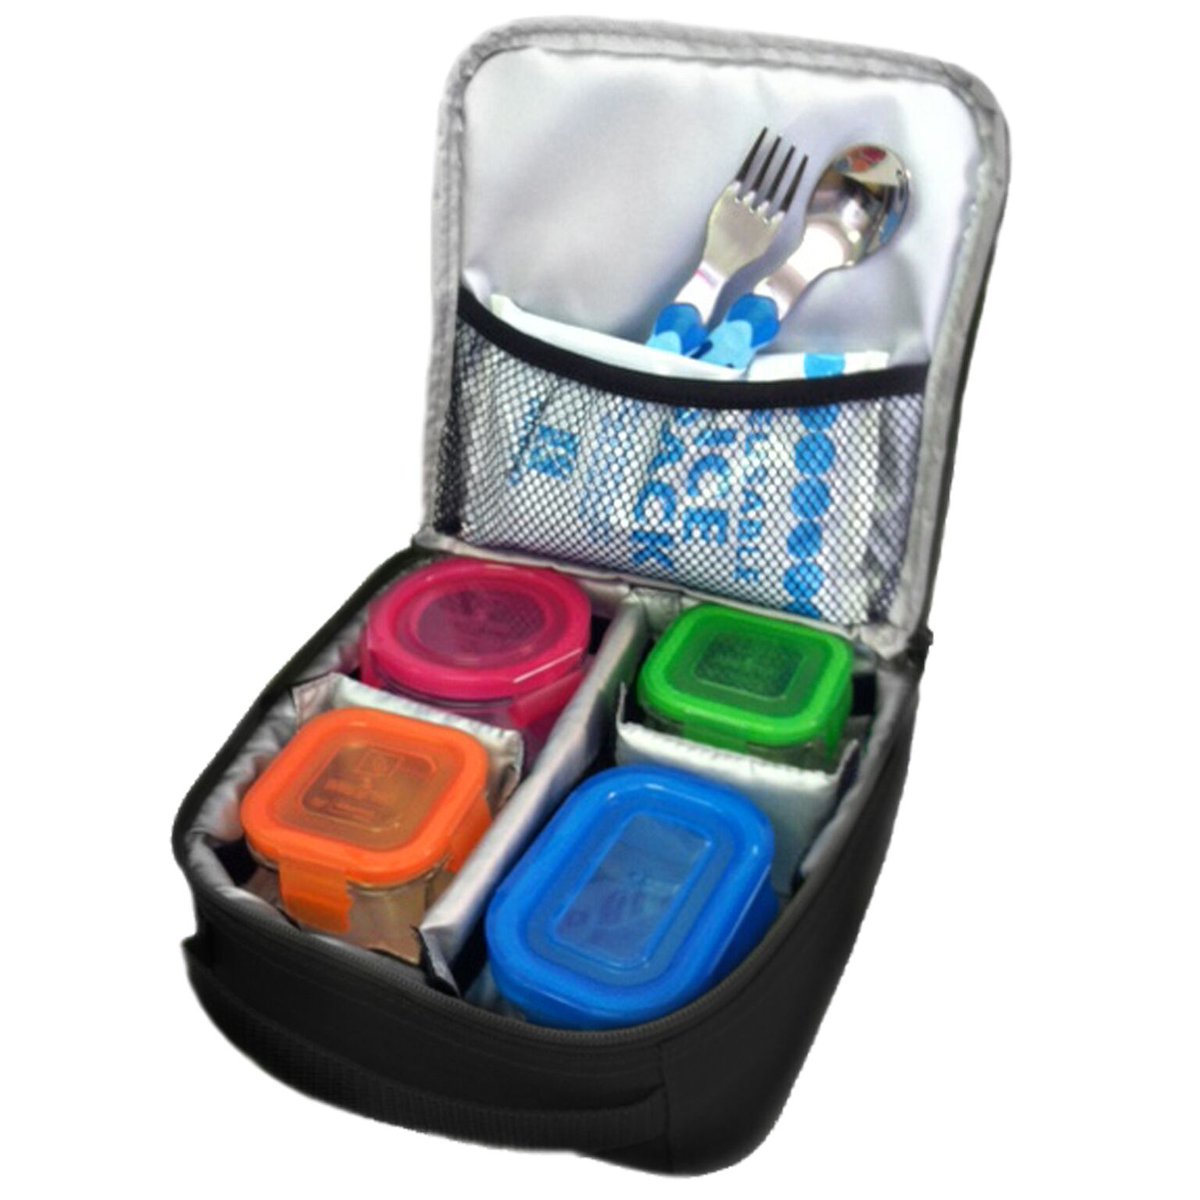 Sometimes you should think INSIDE the box. Our Cooler Cube is perfect for taking baby food or big people food on the go! 

#parentingadventures #jlchildress #travelwithbaby #practicalparenting #familytravel #babyregistrymust #babygear